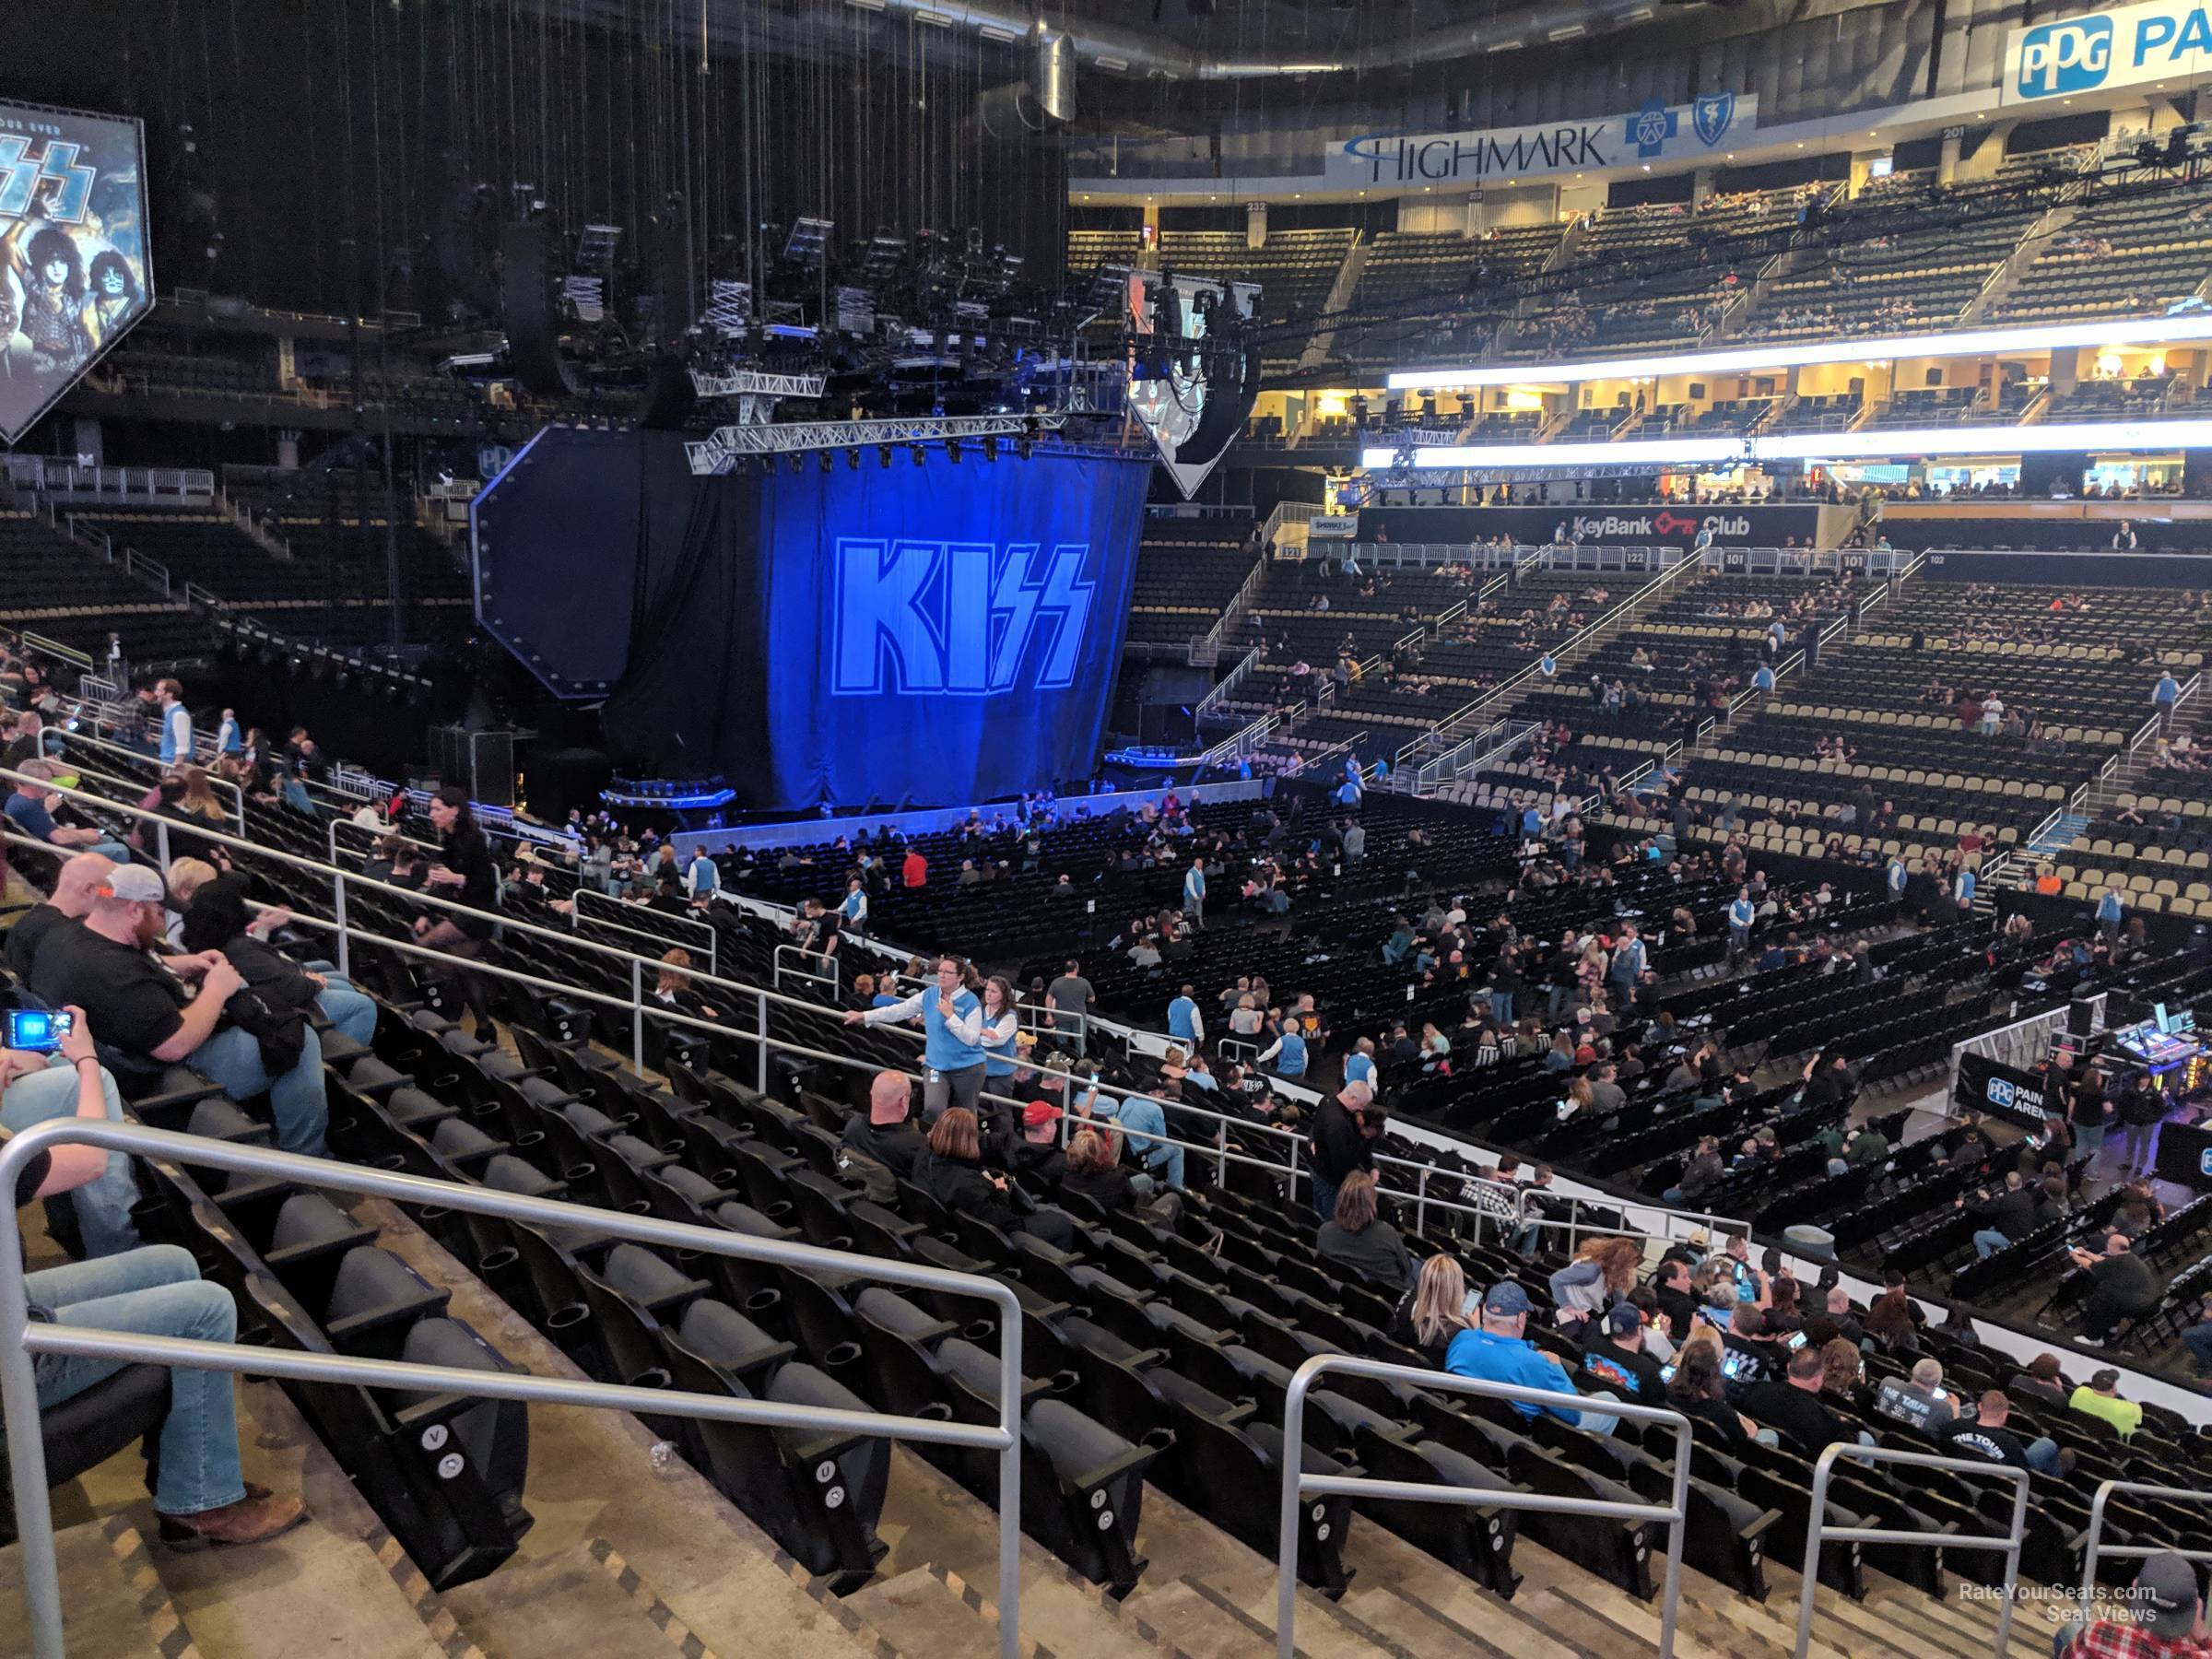 section 110, row w seat view  for concert - ppg paints arena